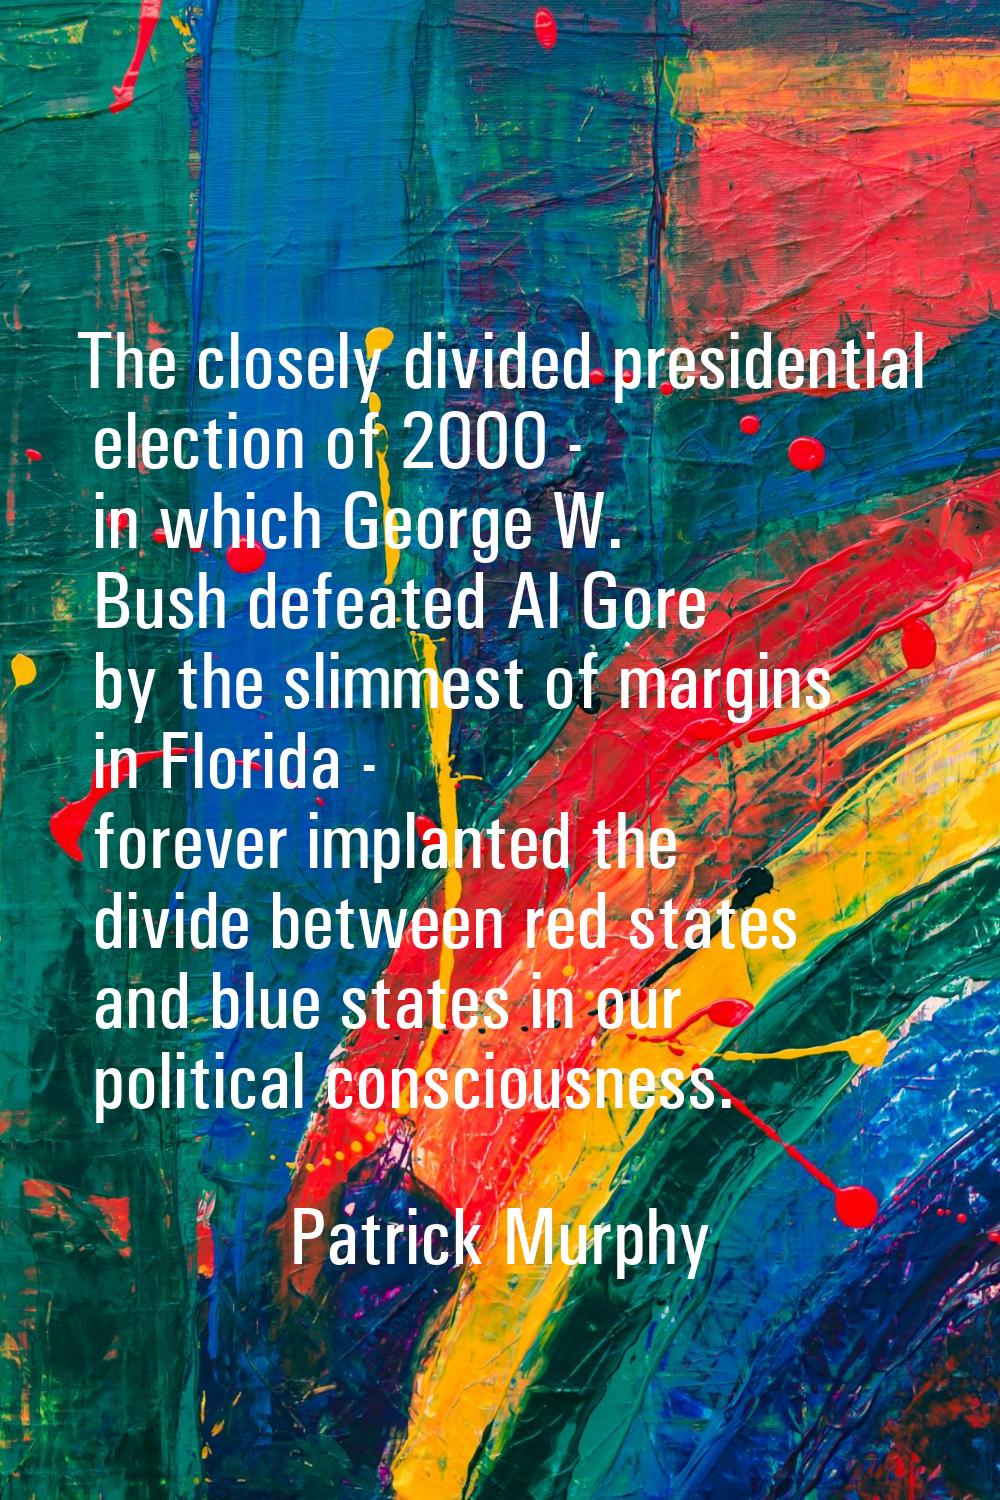 The closely divided presidential election of 2000 - in which George W. Bush defeated Al Gore by the